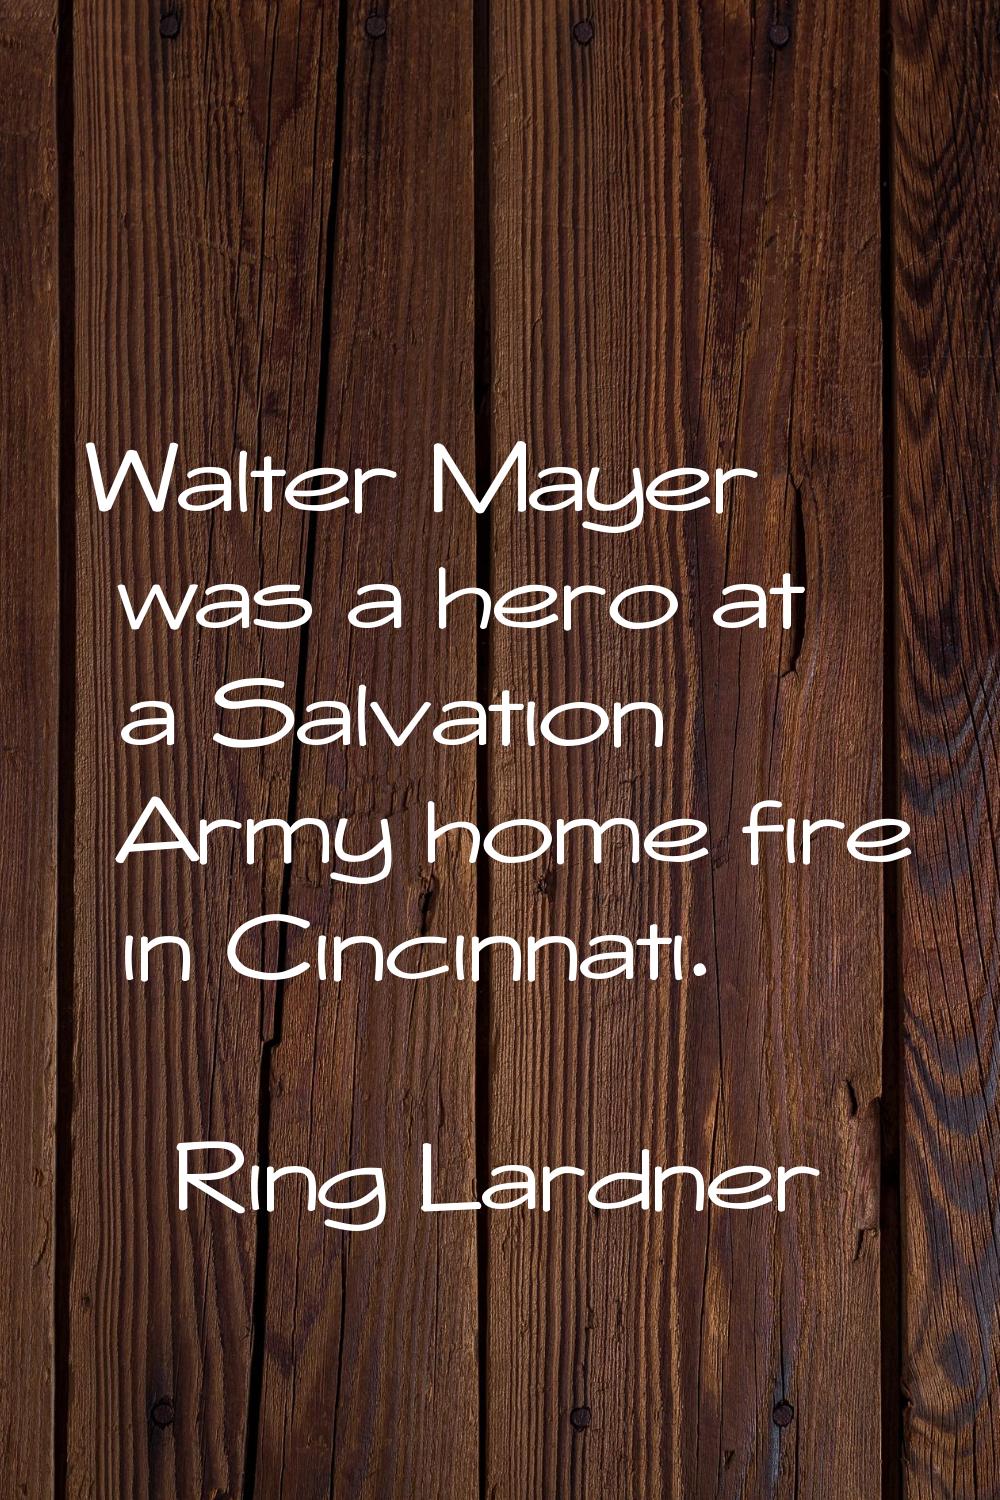 Walter Mayer was a hero at a Salvation Army home fire in Cincinnati.